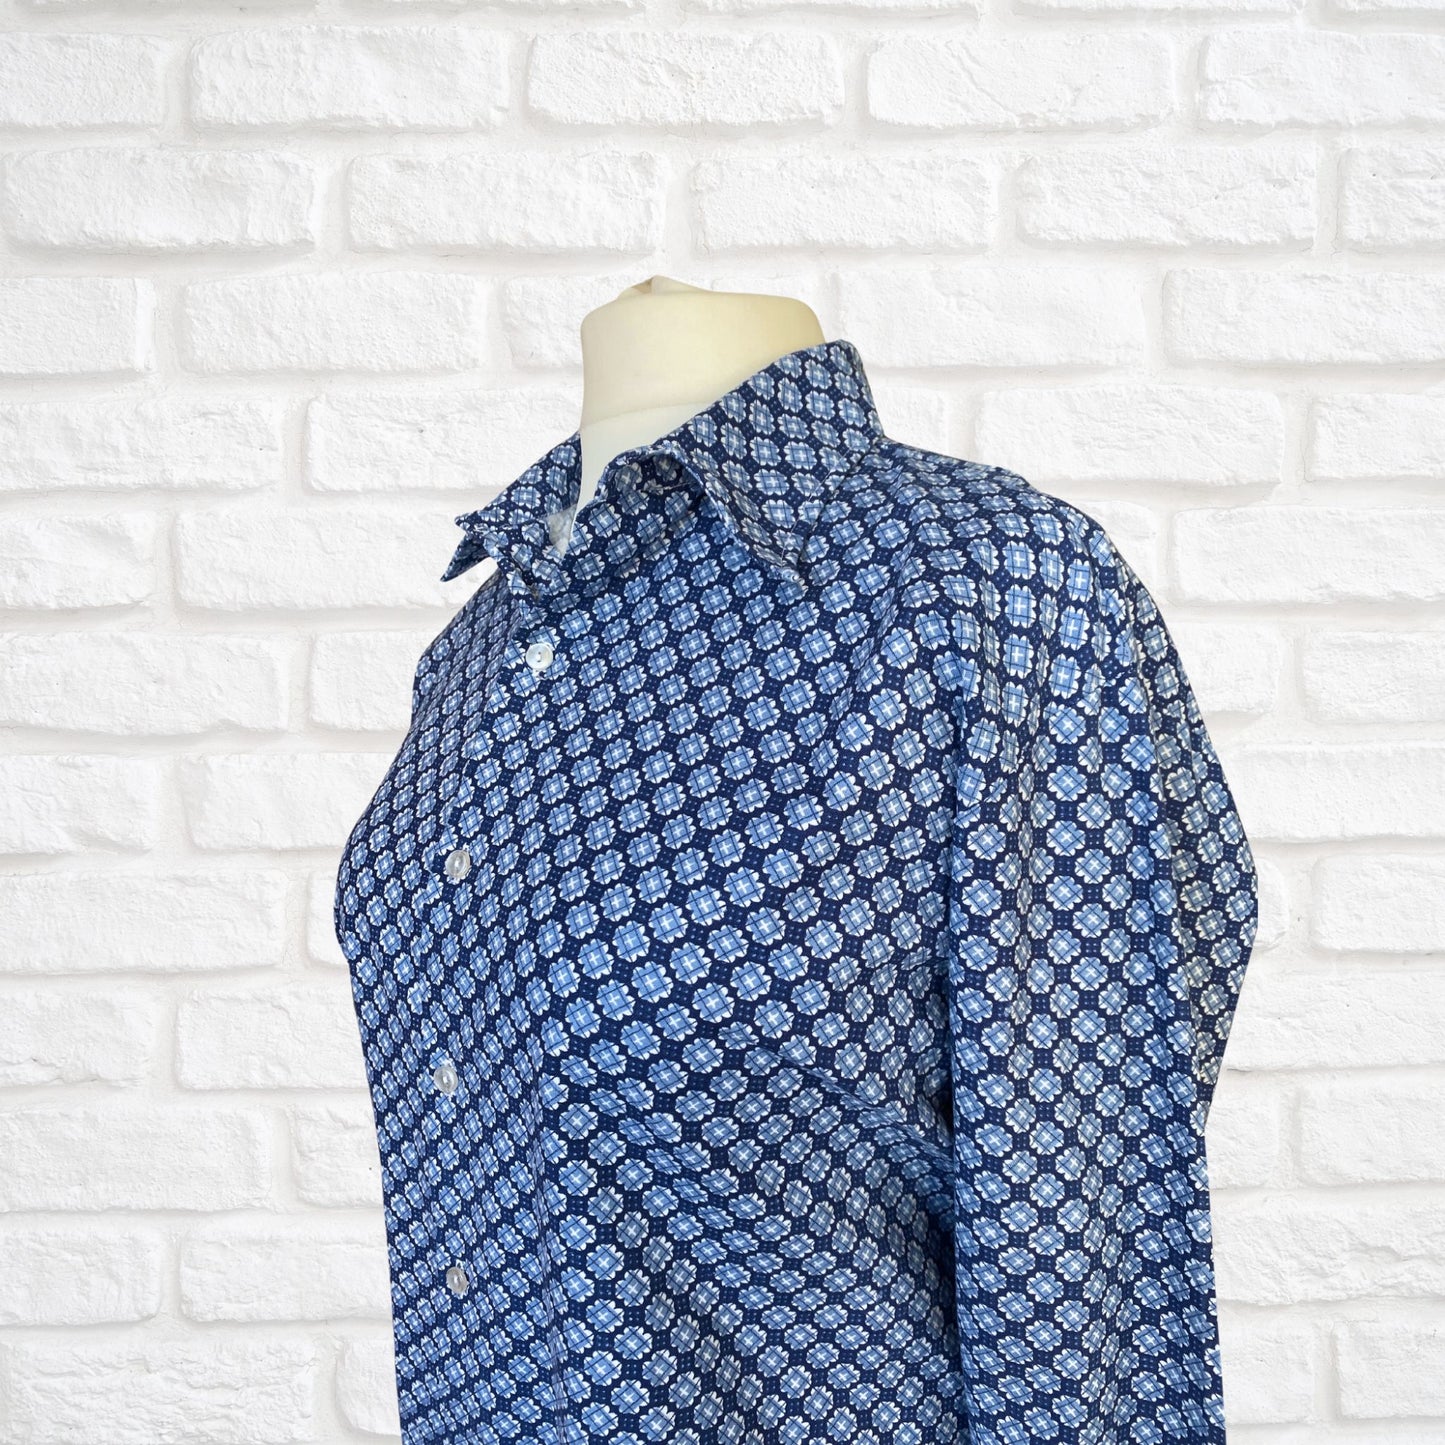 Vintage 1970s Blue Cotton Geometric Print Dagger Collar Shirt - Smart and Casual Style . Approx UK size XL to XXL (men) 20-24 ( women)